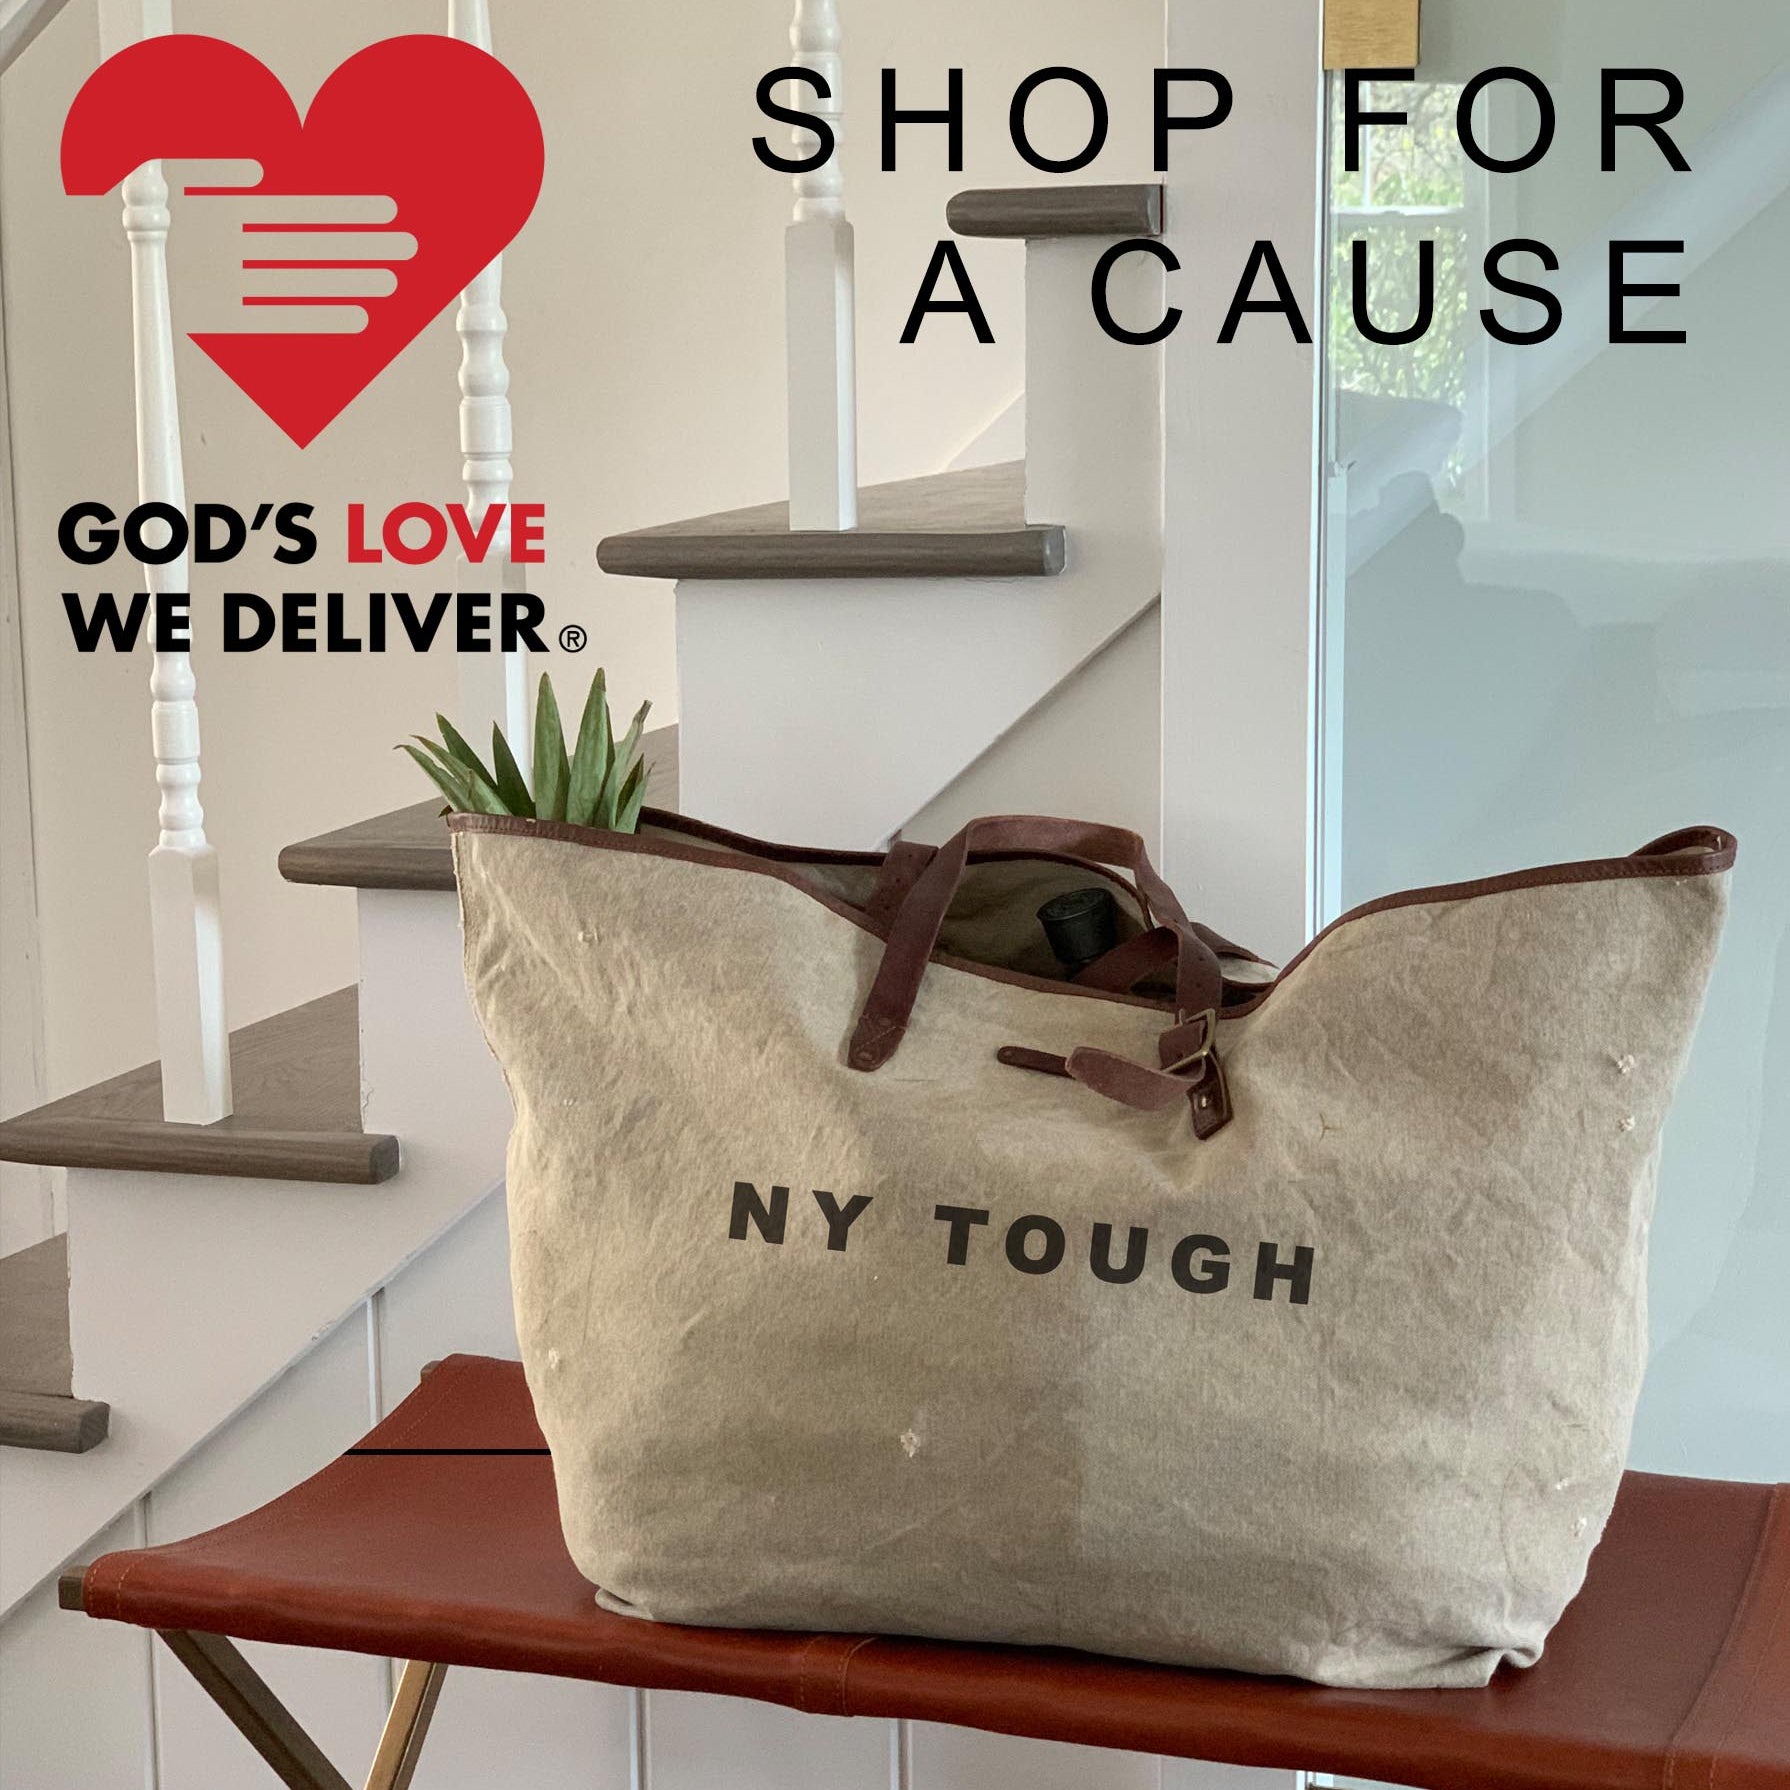 NY TOUGH ❤ SHOP FOR CAUSE